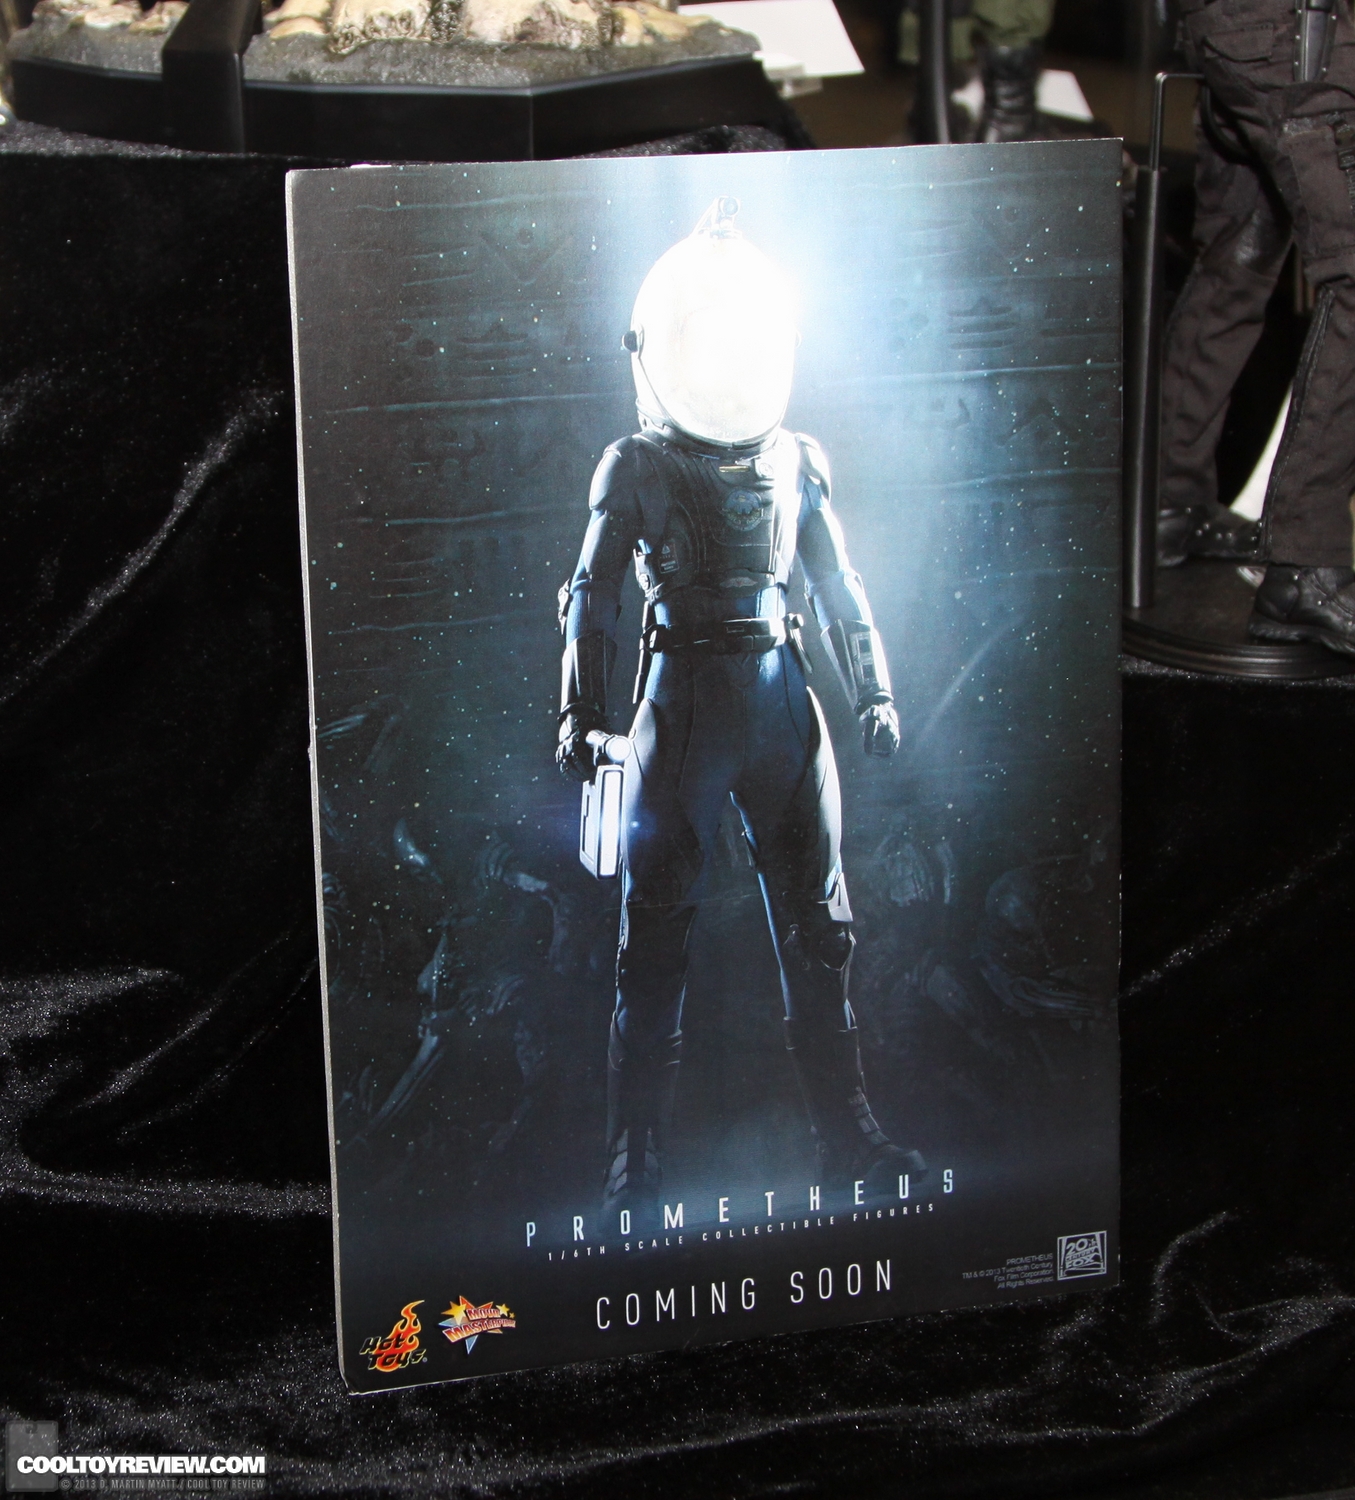 http://www.cooltoyreview.com/2013_SDCC/SDCC_2013_Hot_Toys_Saturday/SDCC_2013_Hot_Toys_Saturday-032.jpg